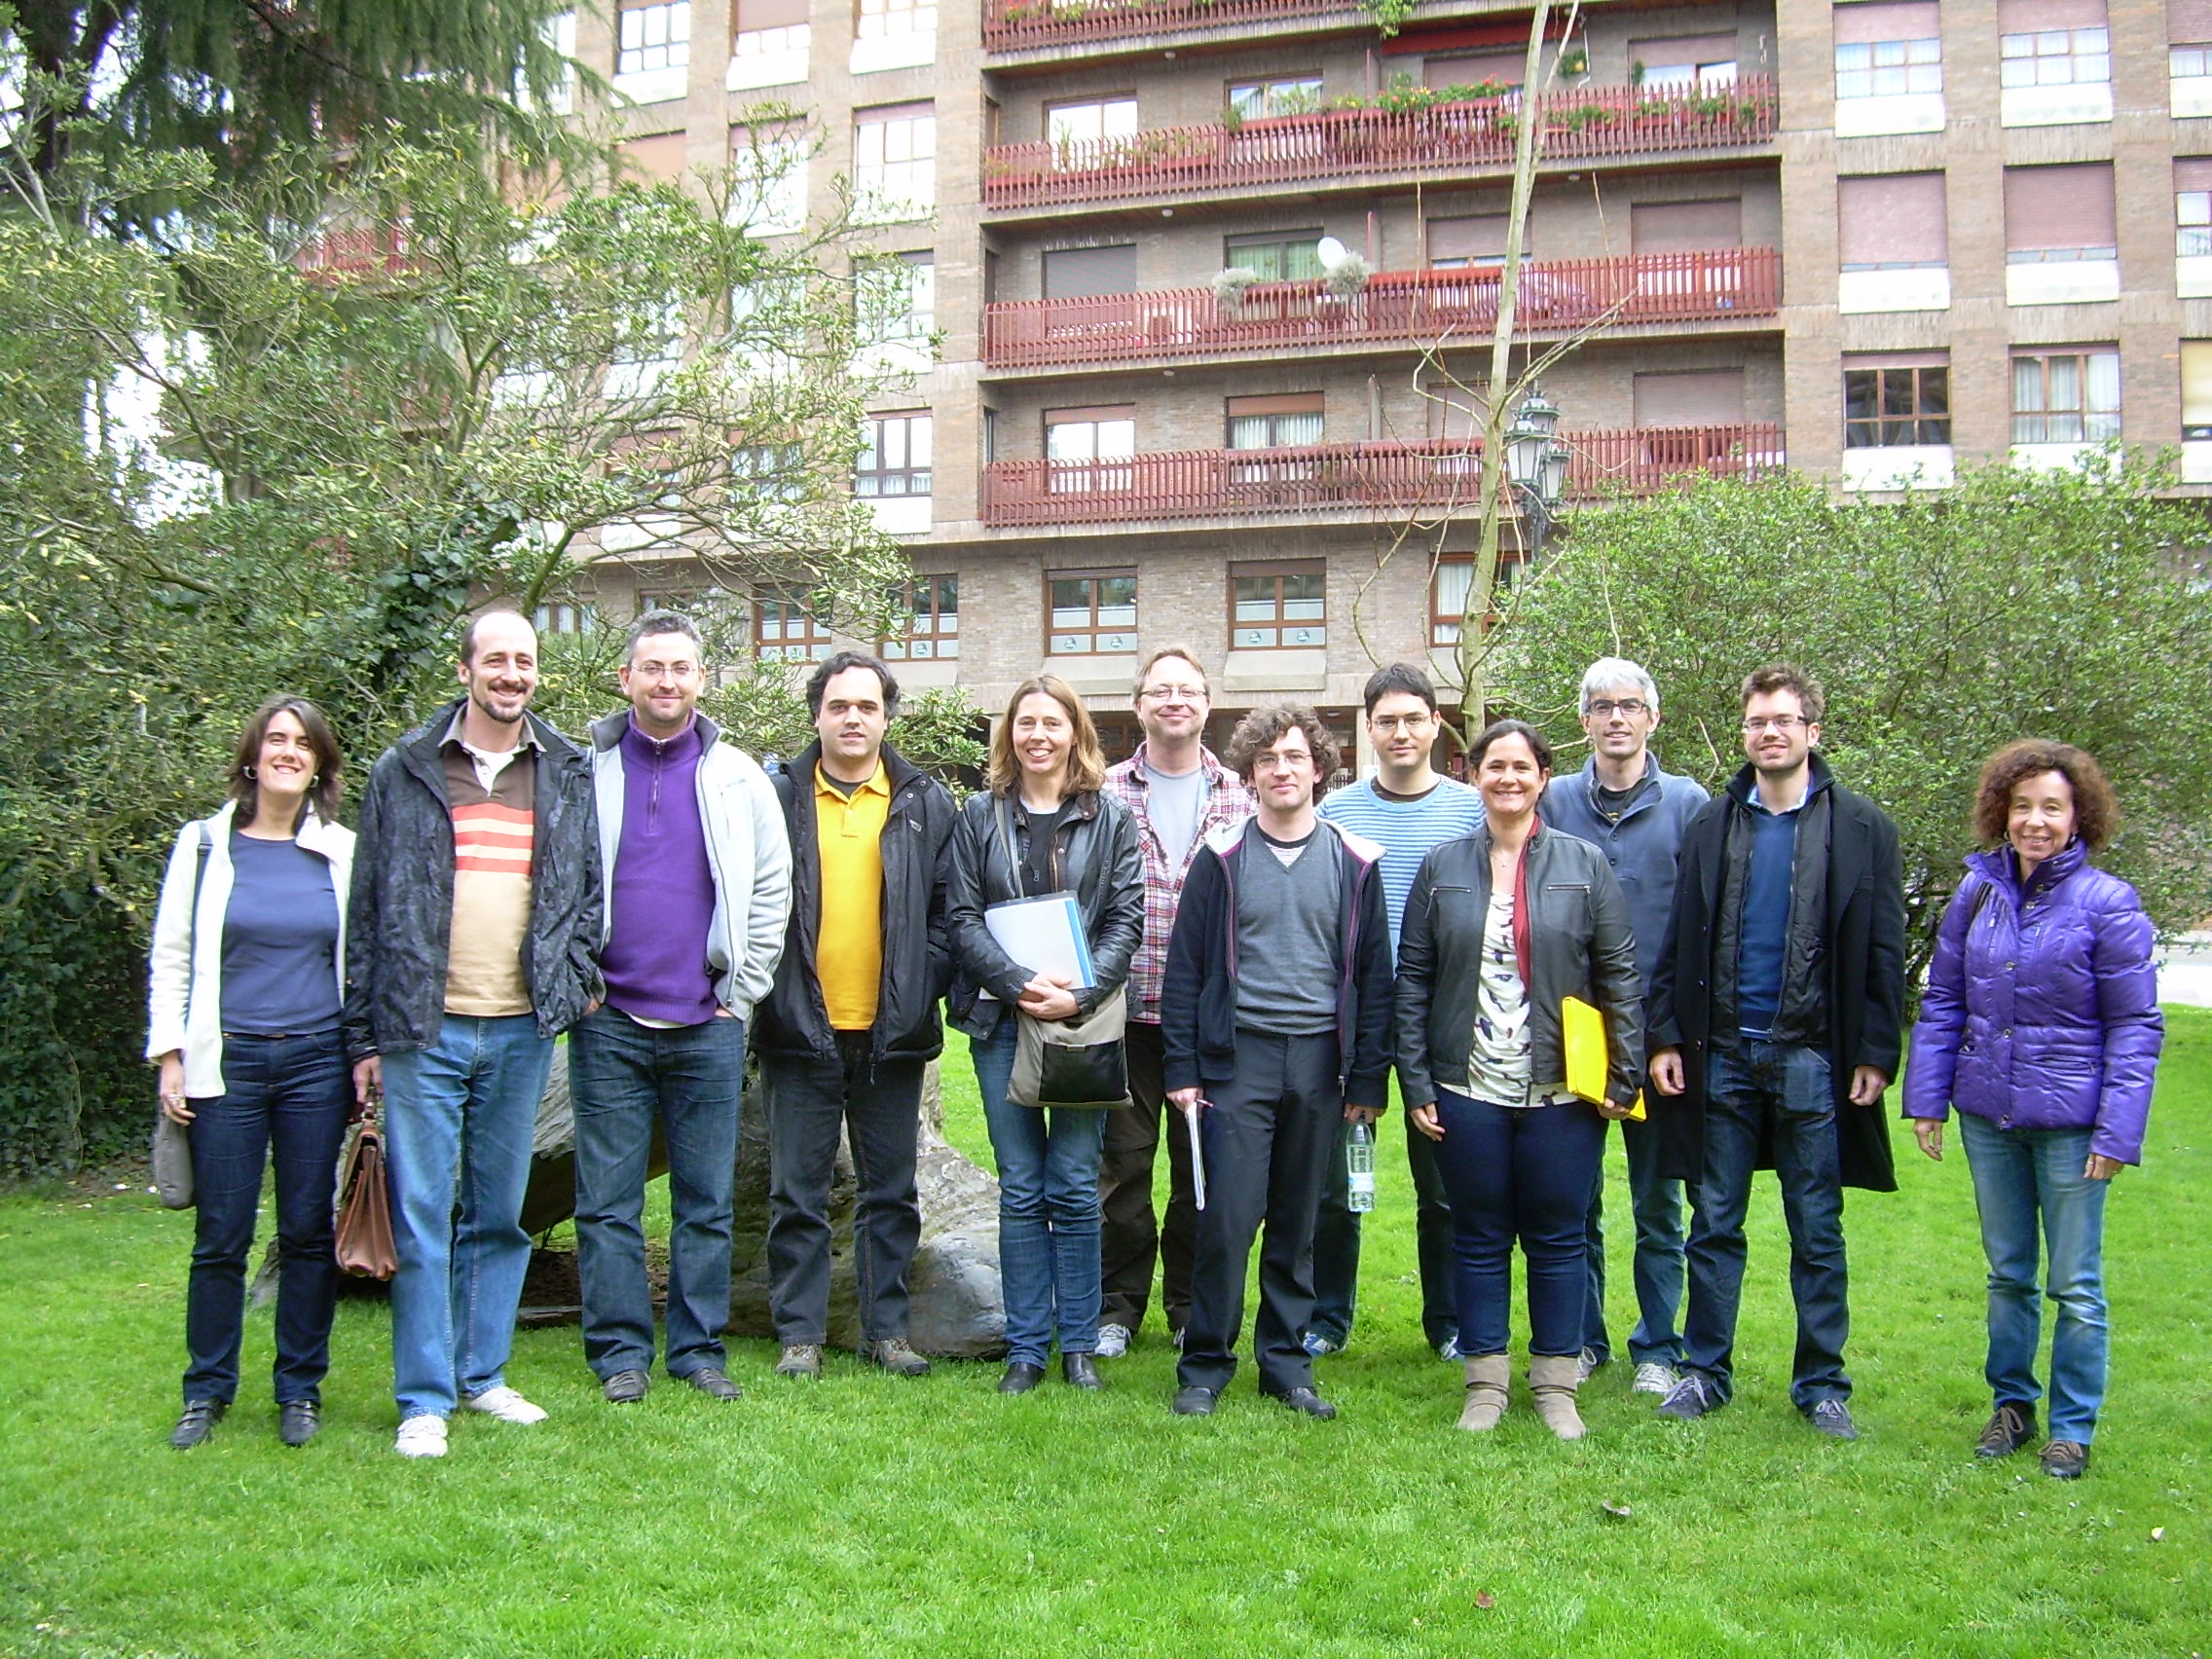 Some participants of the workshop